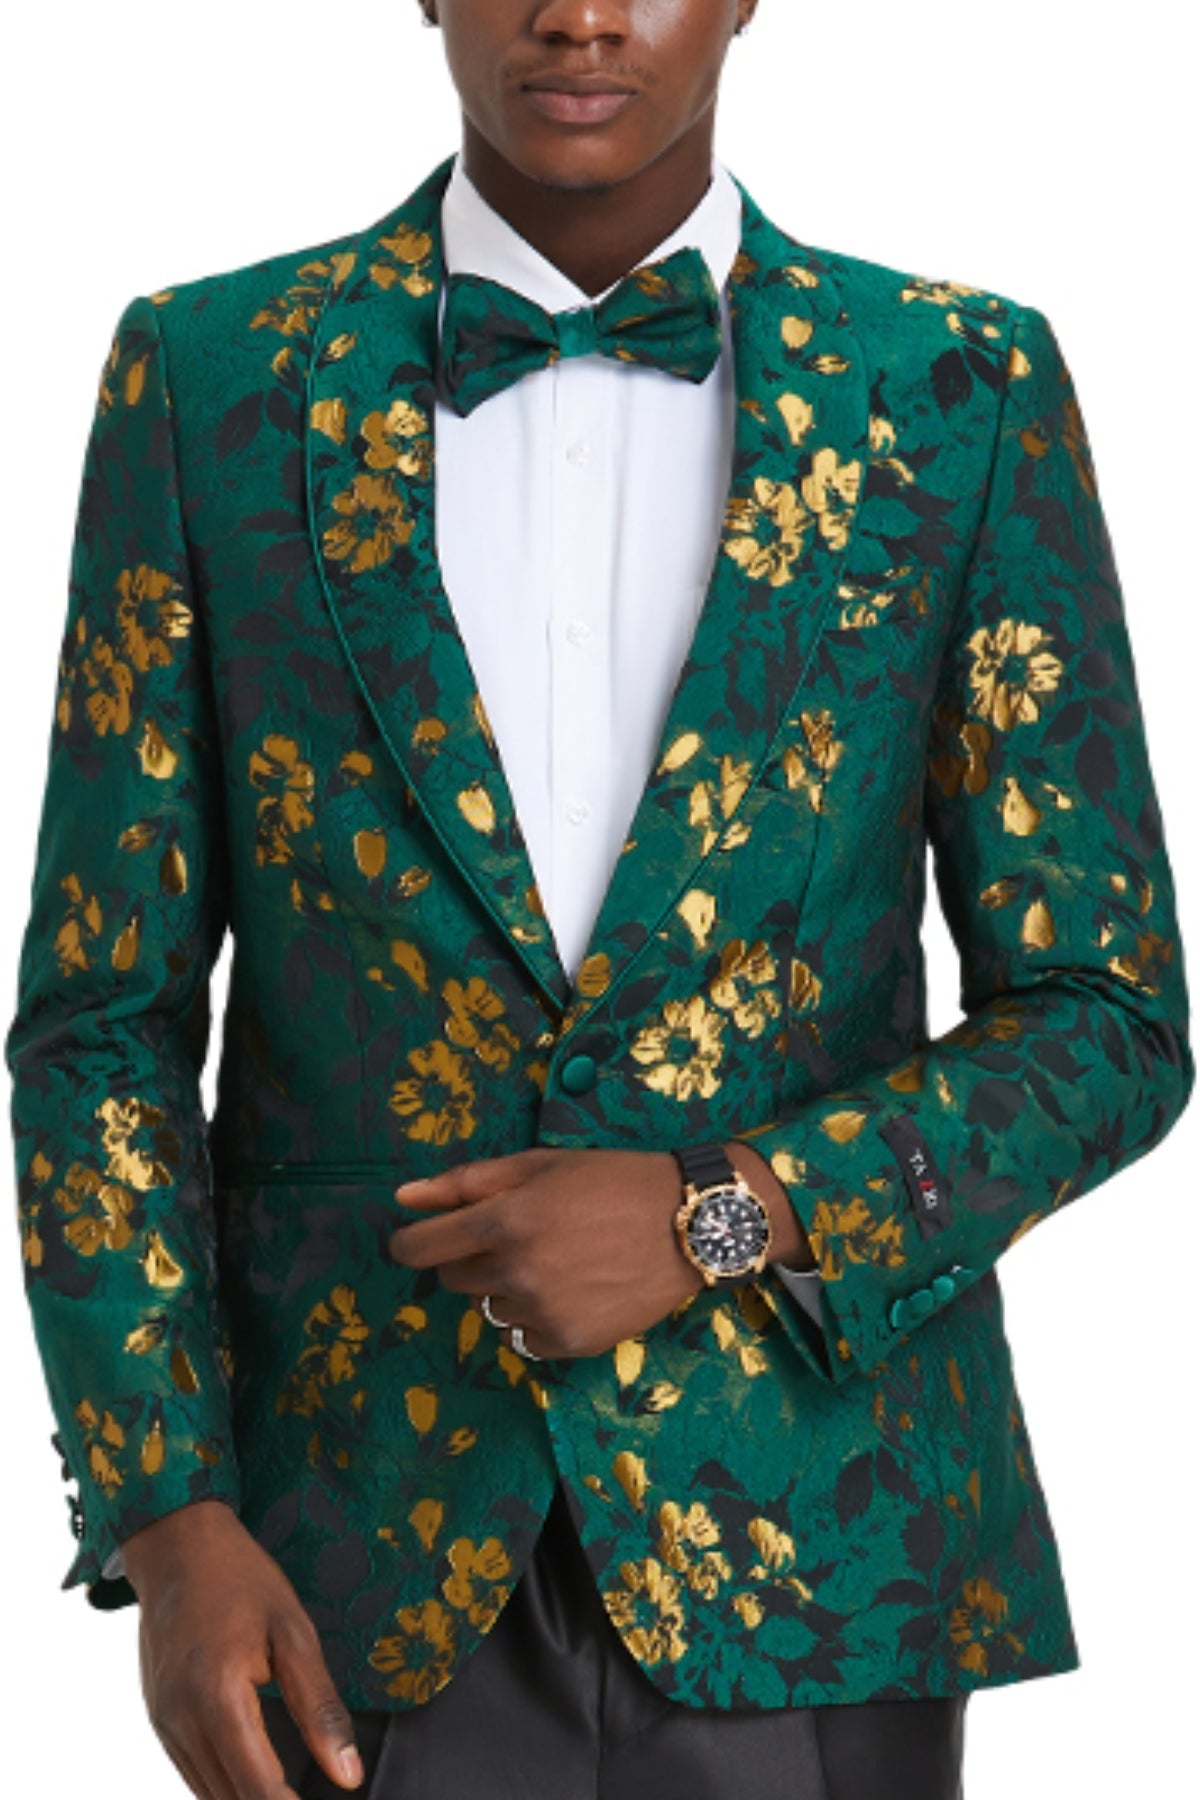 KCT Menswear's Emerald Green & Gold Floral Prom Blazer and Matching Bowtie - Elegant Formalwear for Prom 2023